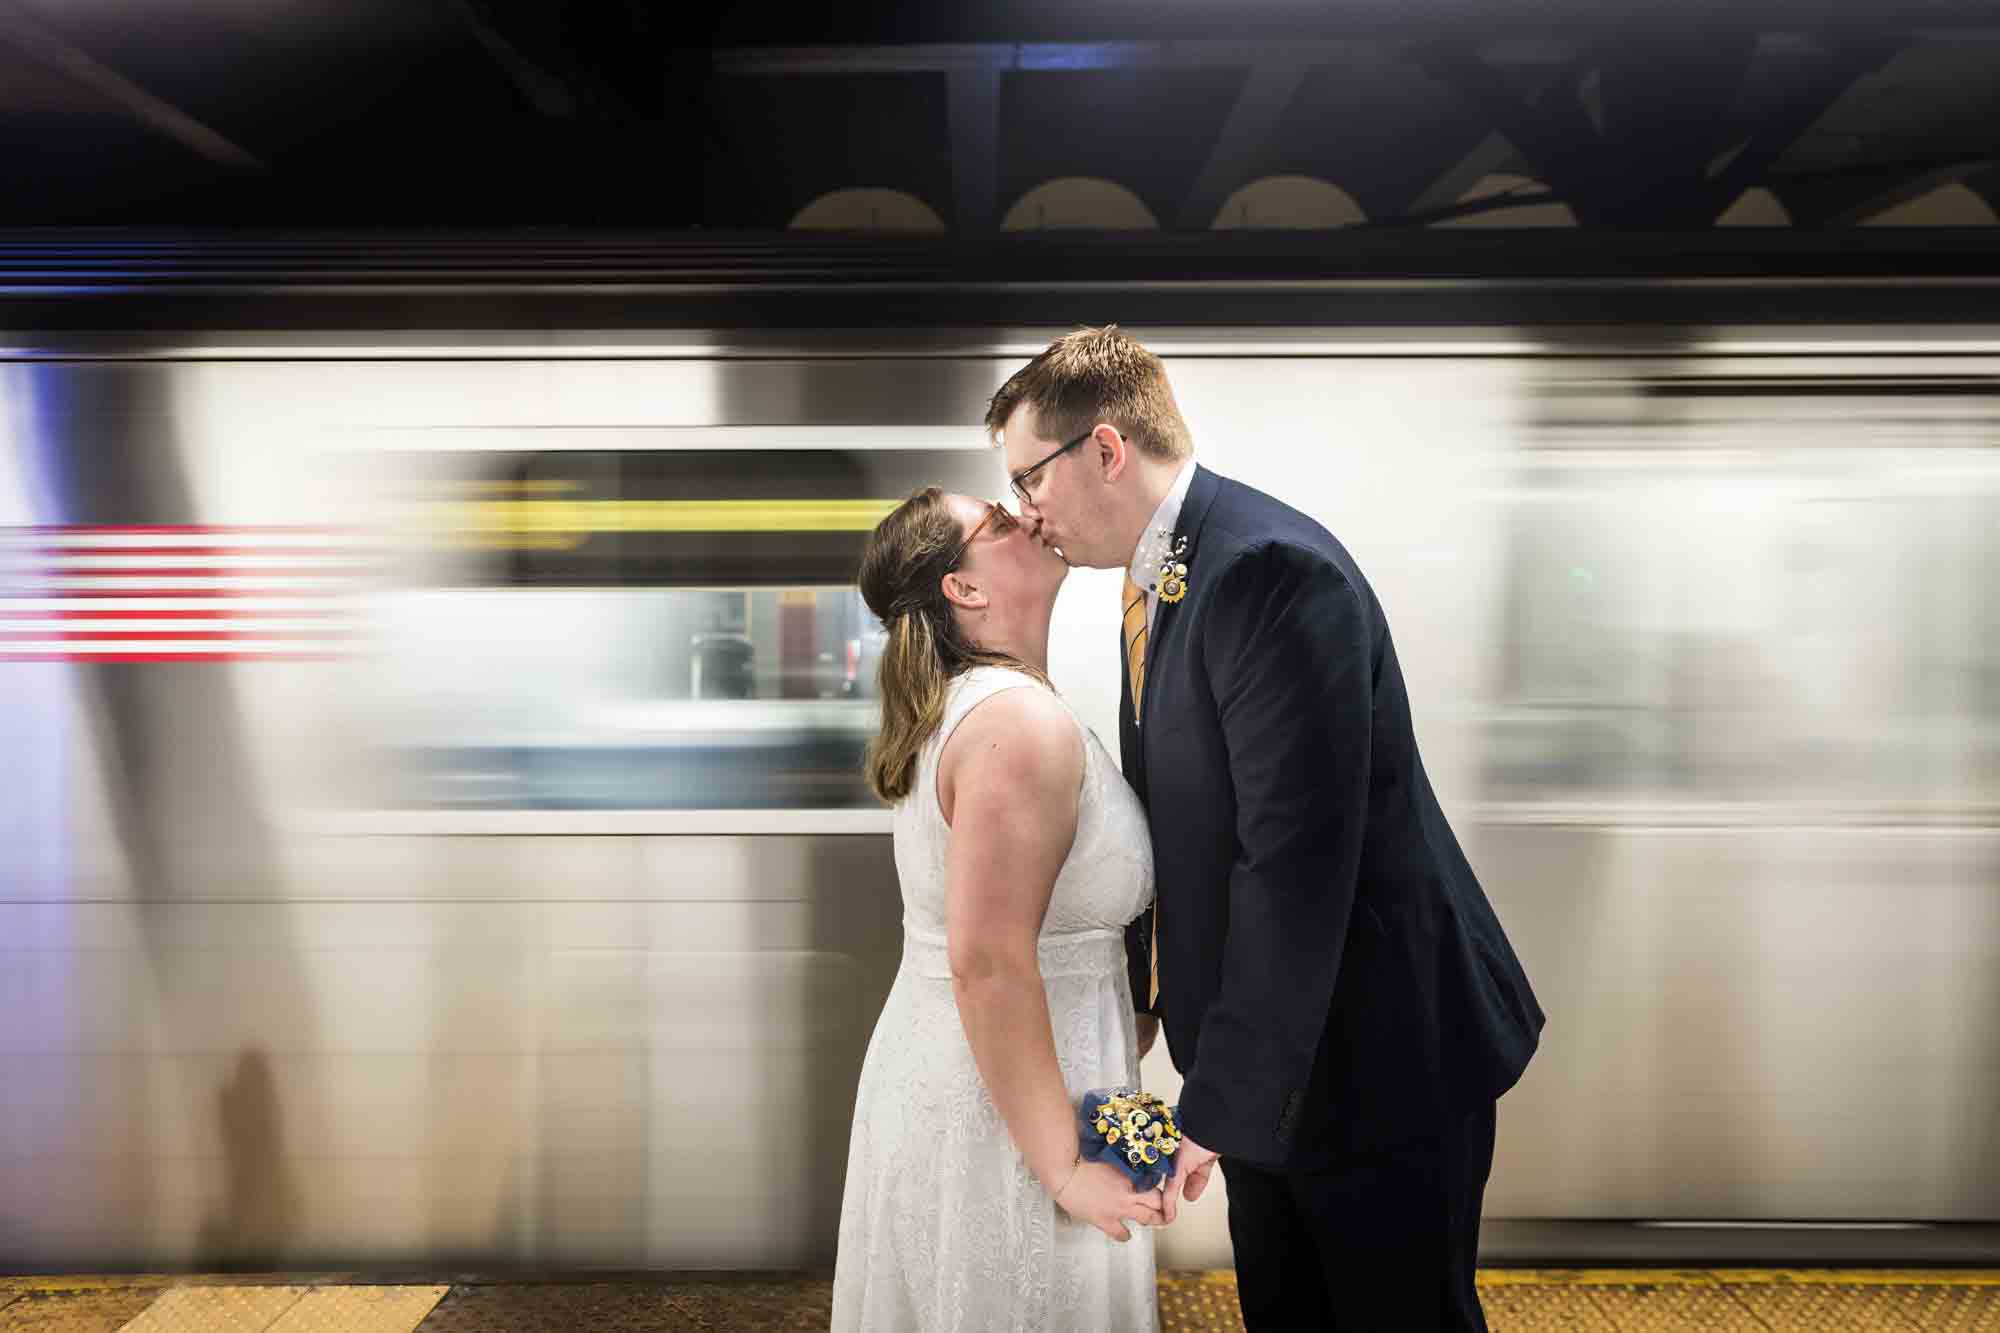 Couple kissing with subway train going by in a blur for an article on how to get a marriage license in San Antonio